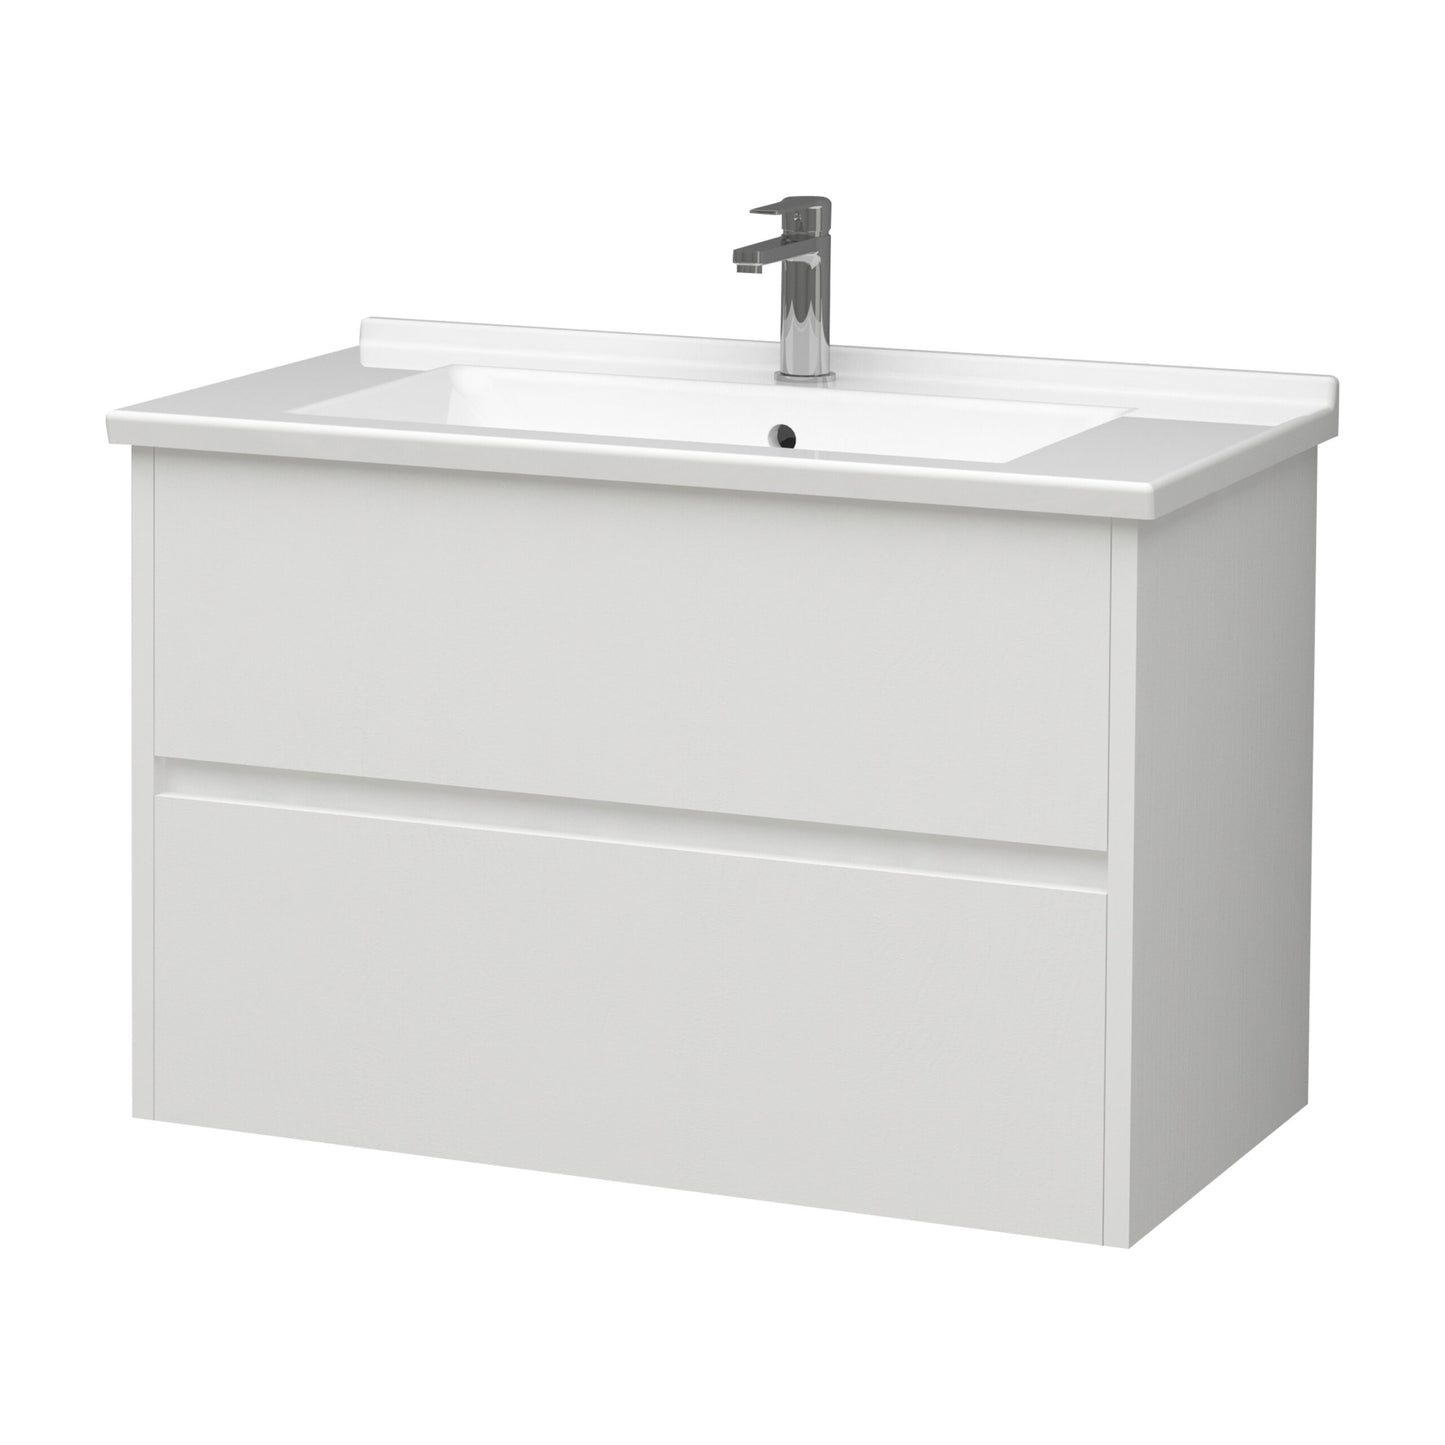 Oase Sun vanity unit with high-quality wooden drawers, side cabinet and mirror